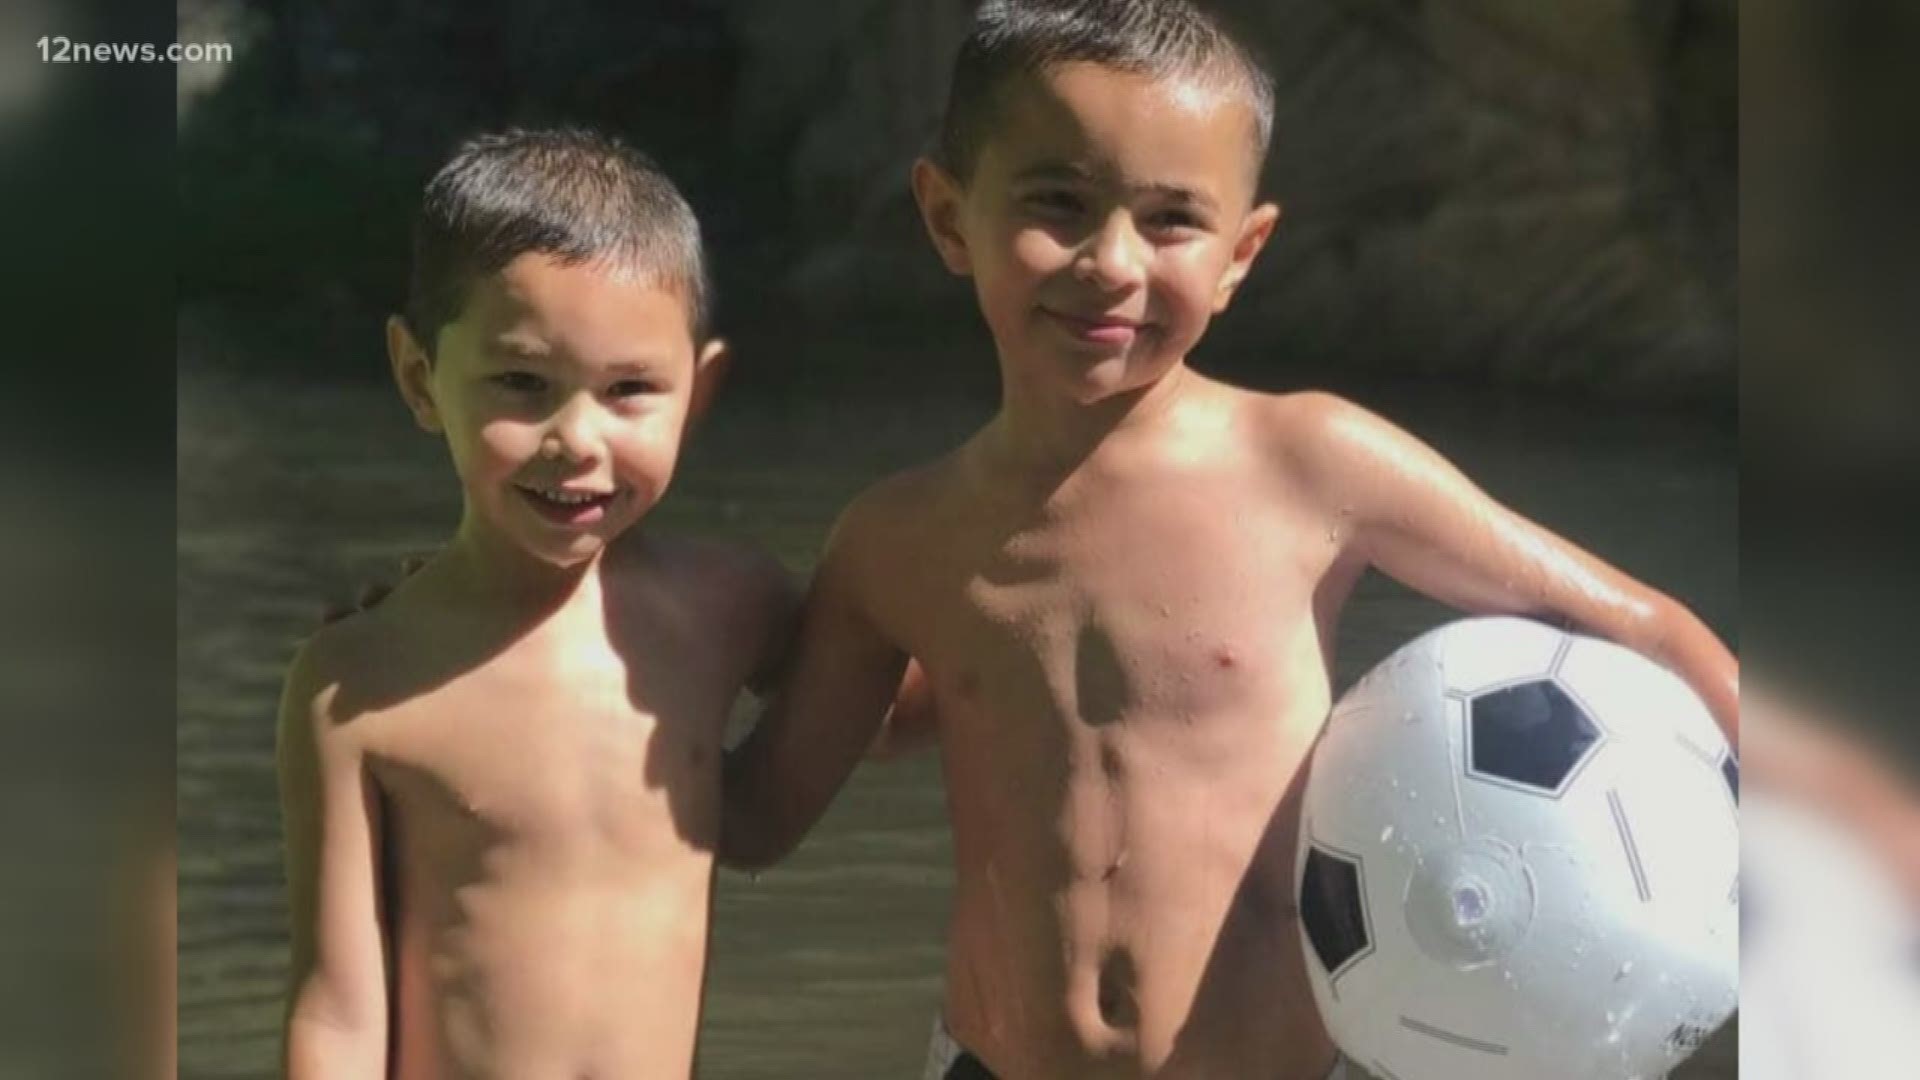 Two children were found in Puerto Peñasco, Sonora, Mexico, after an Amber Alert was issued for them in Phoenix in Sept. 2018.